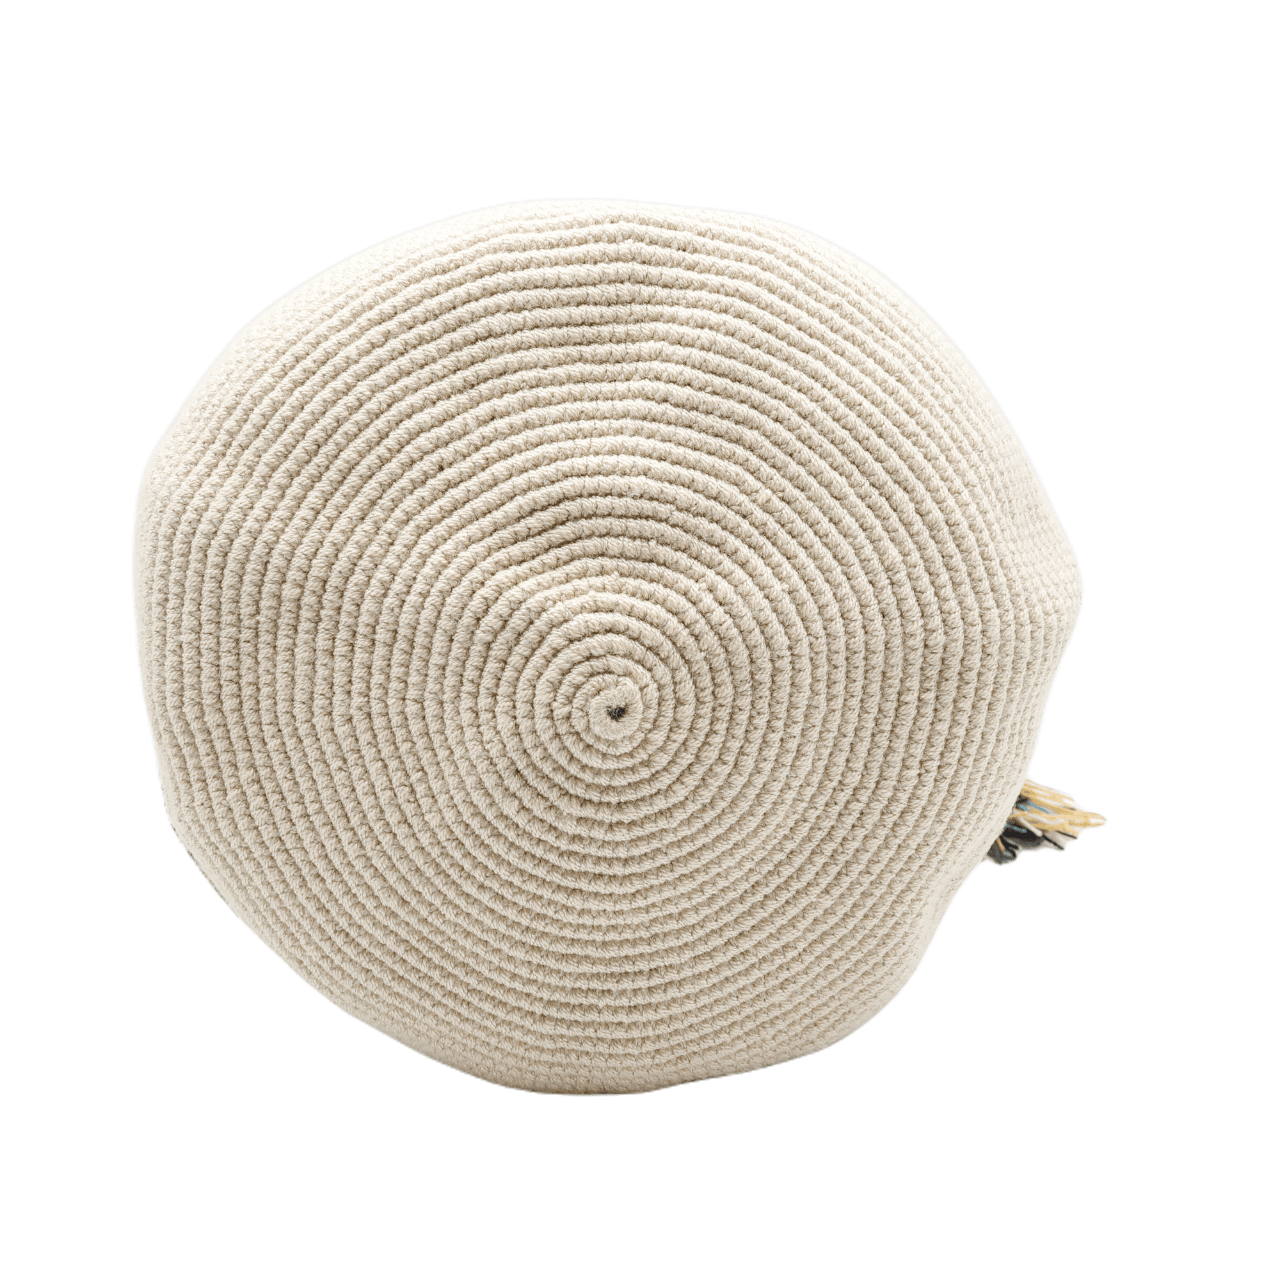 Luisa Wayuu Bag in beige color with a stunning macrame shoulder strap, showcasing exquisite craftsmanship and unique style